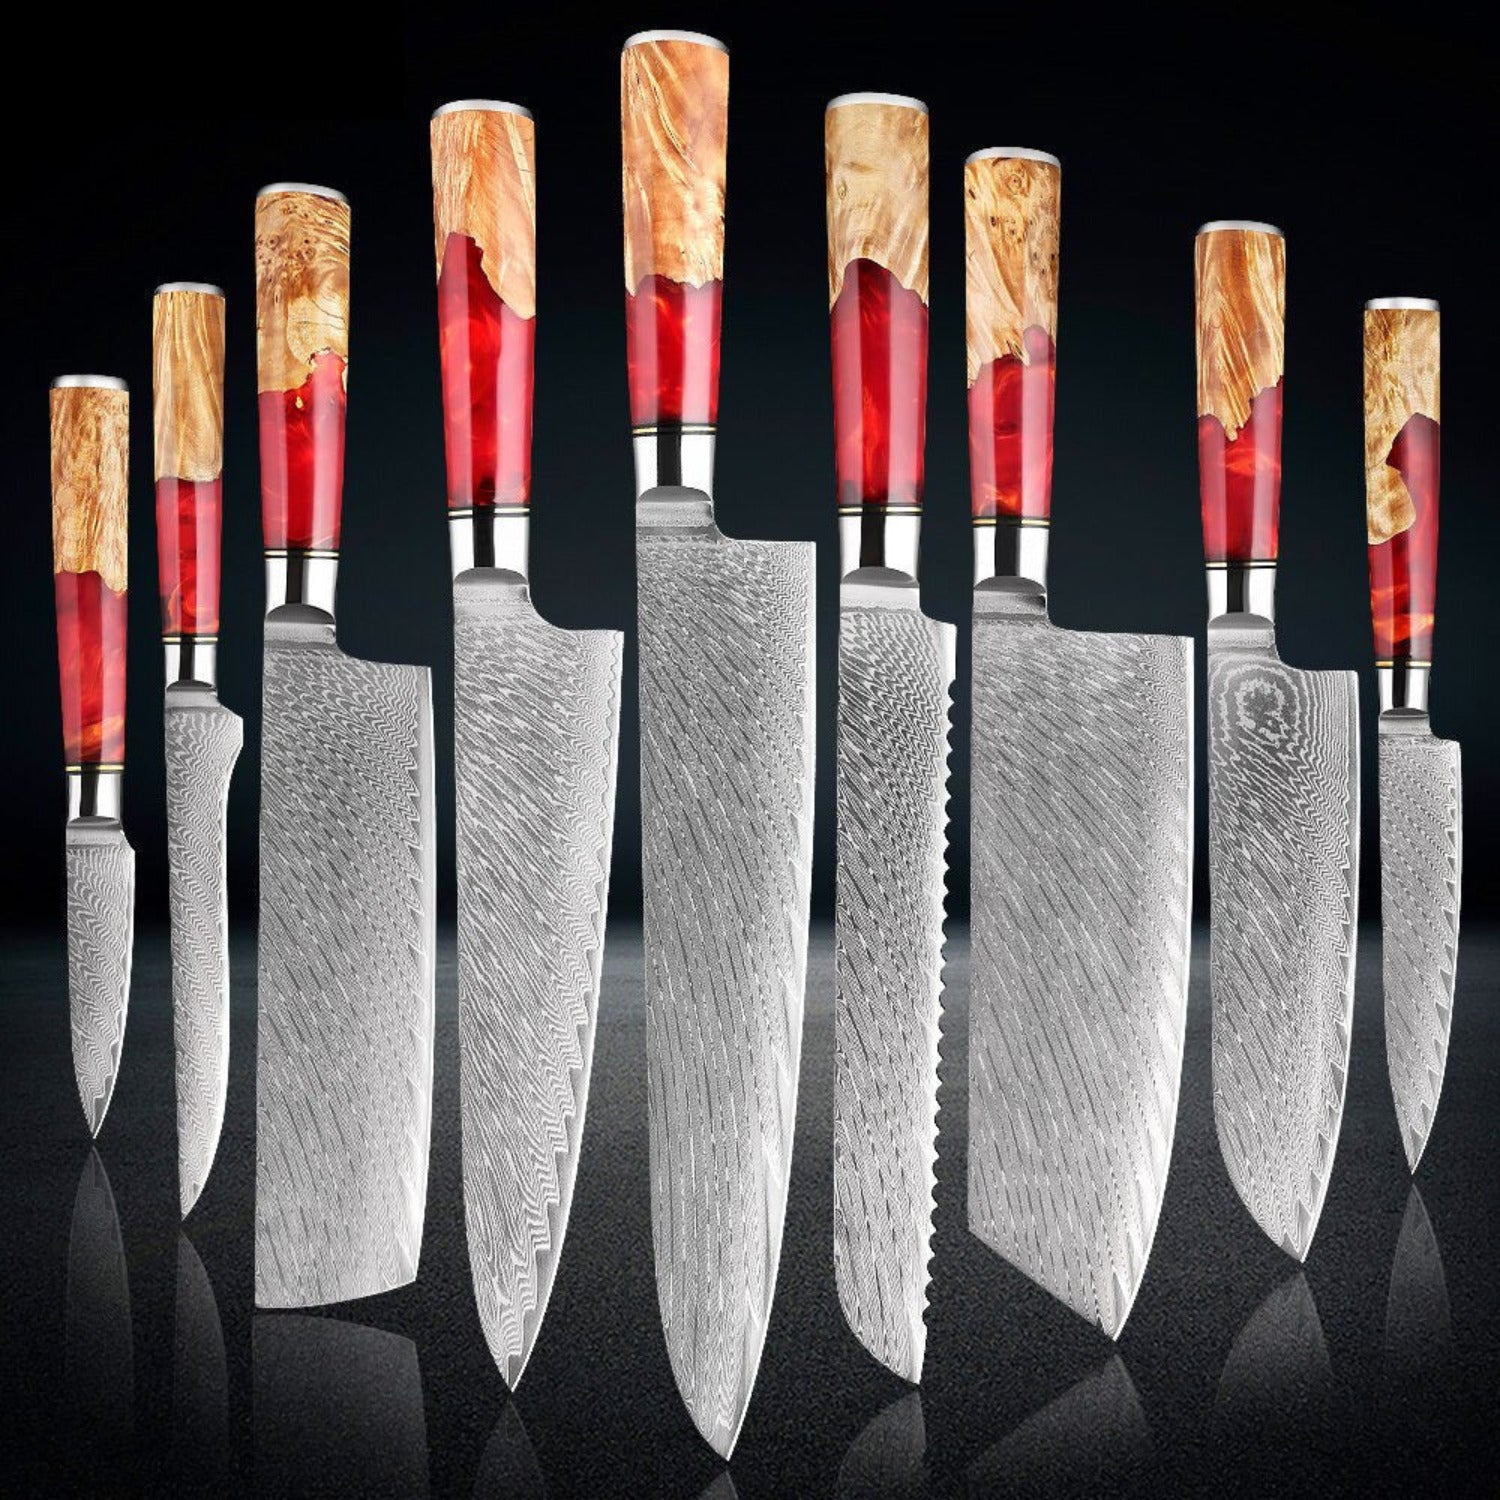 XITUO Kitchen Knives-Set Damascus Steel VG10 Chef Knife Cleaver Paring  Bread Knife Blue Resin and Color Wood Handle 1-7PCS set